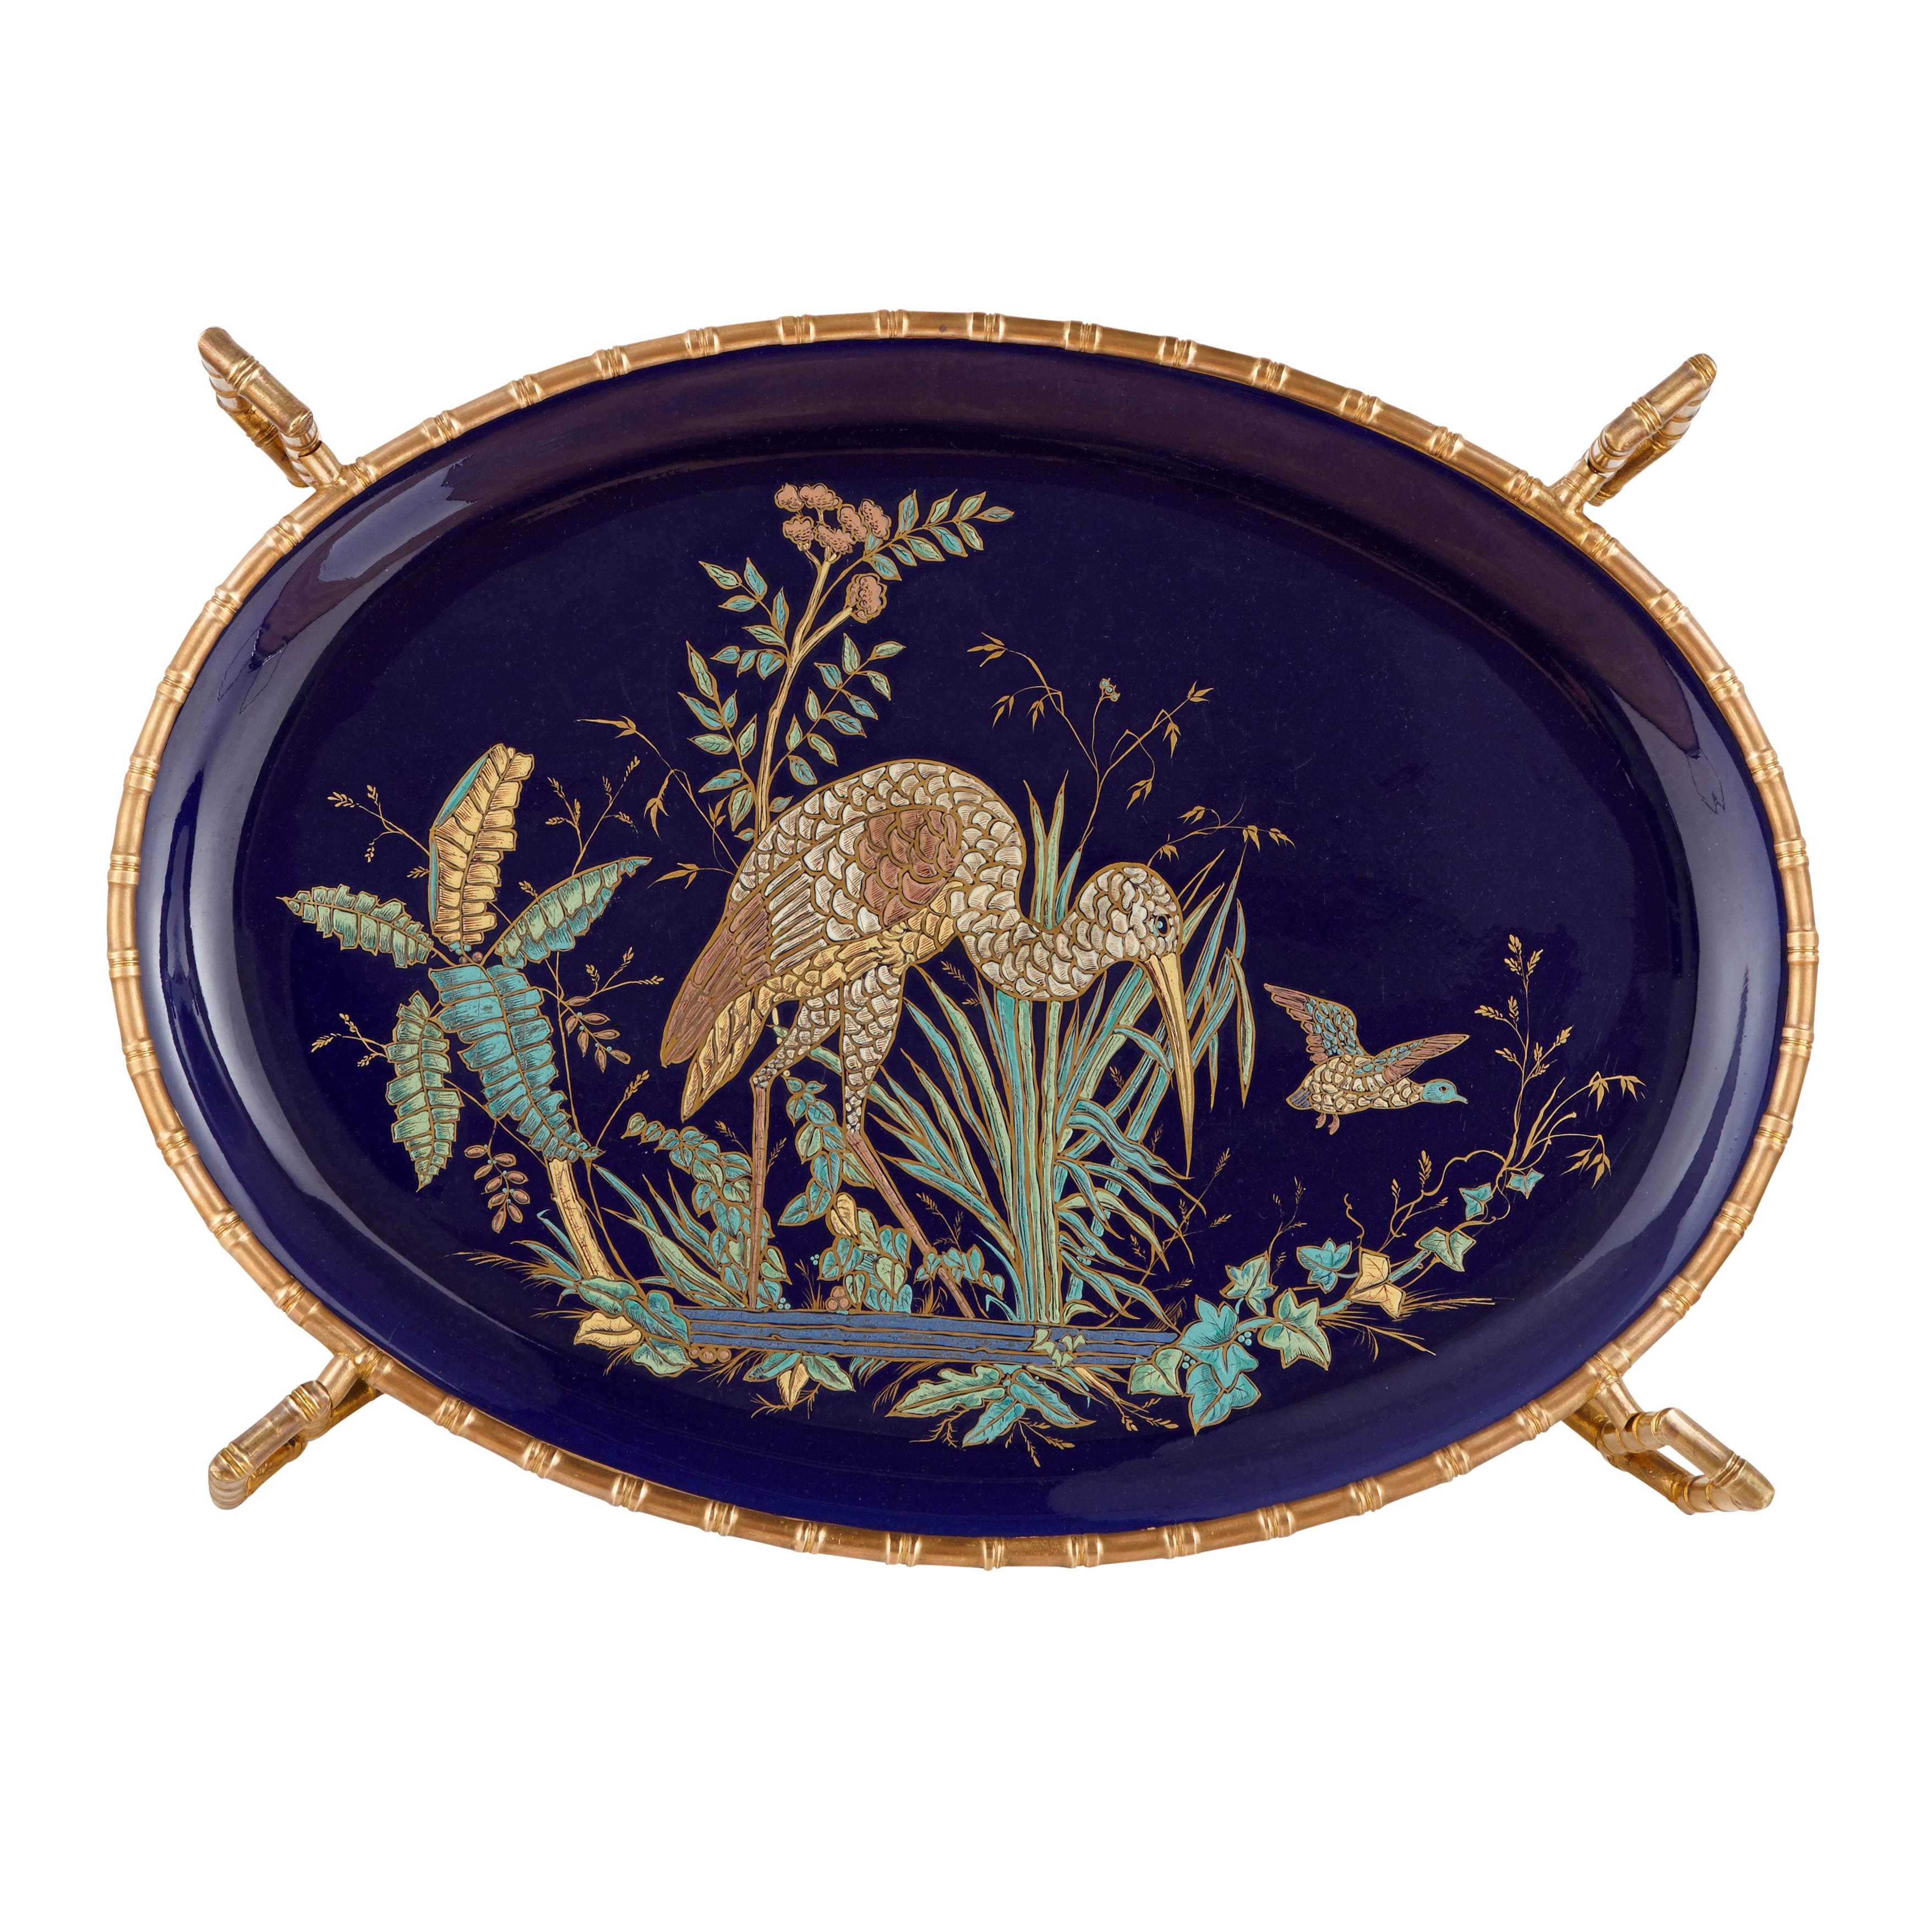 Of Chinoiserie style with an ormolu base cast to imitate bamboo wood, the tabletop depicting a large heron among flowers in lake.